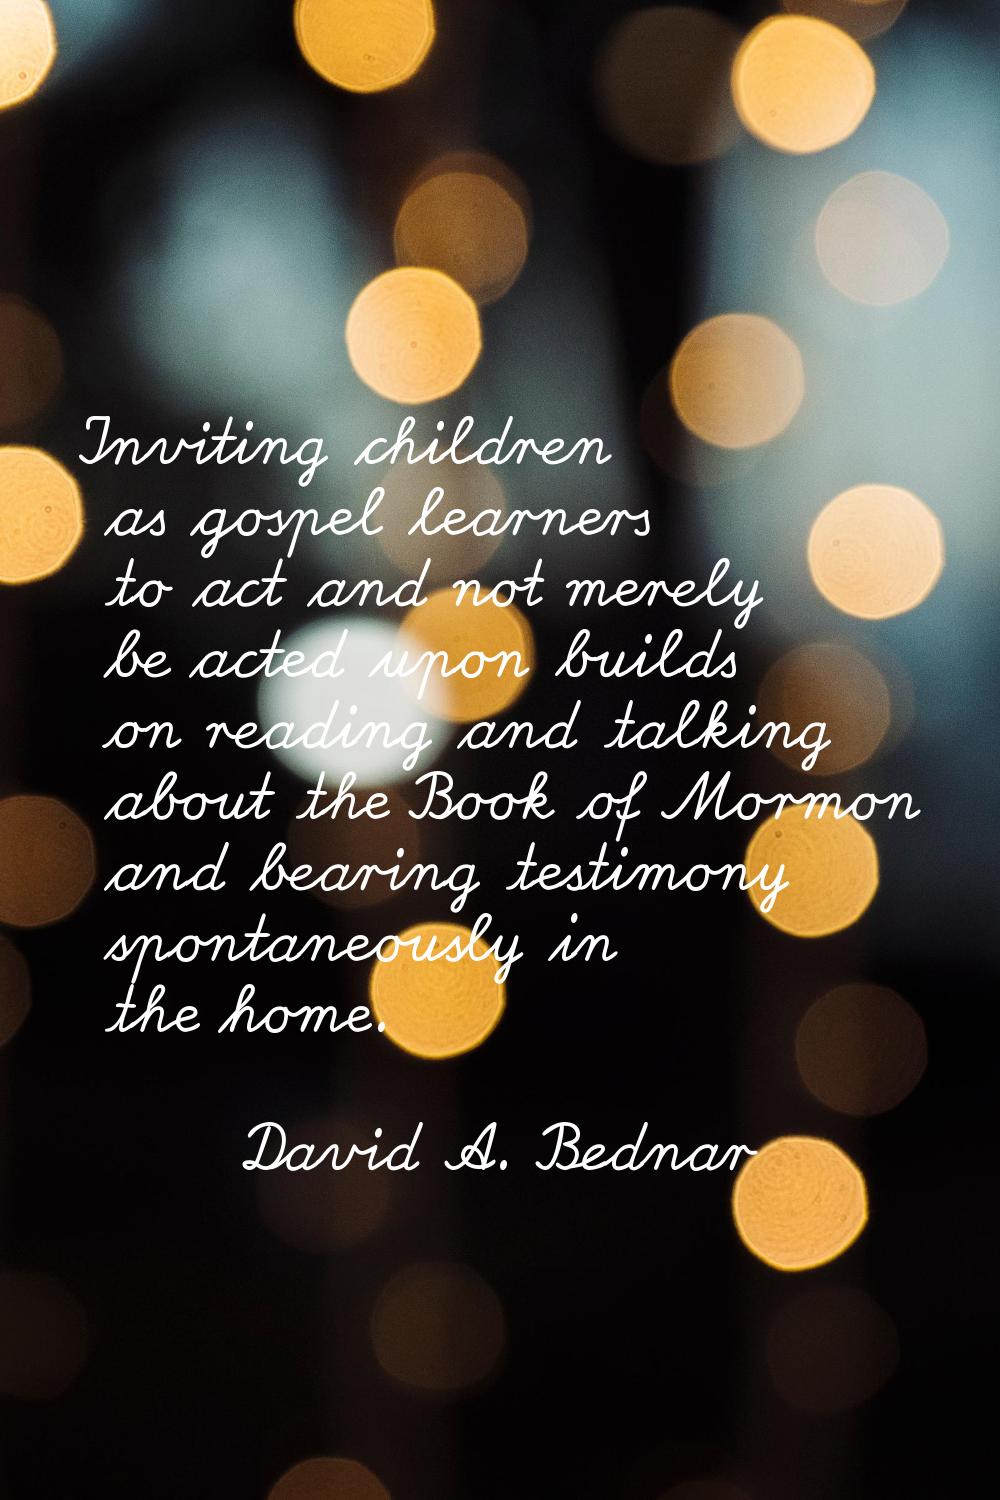 Inviting children as gospel learners to act and not merely be acted upon builds on reading and talk